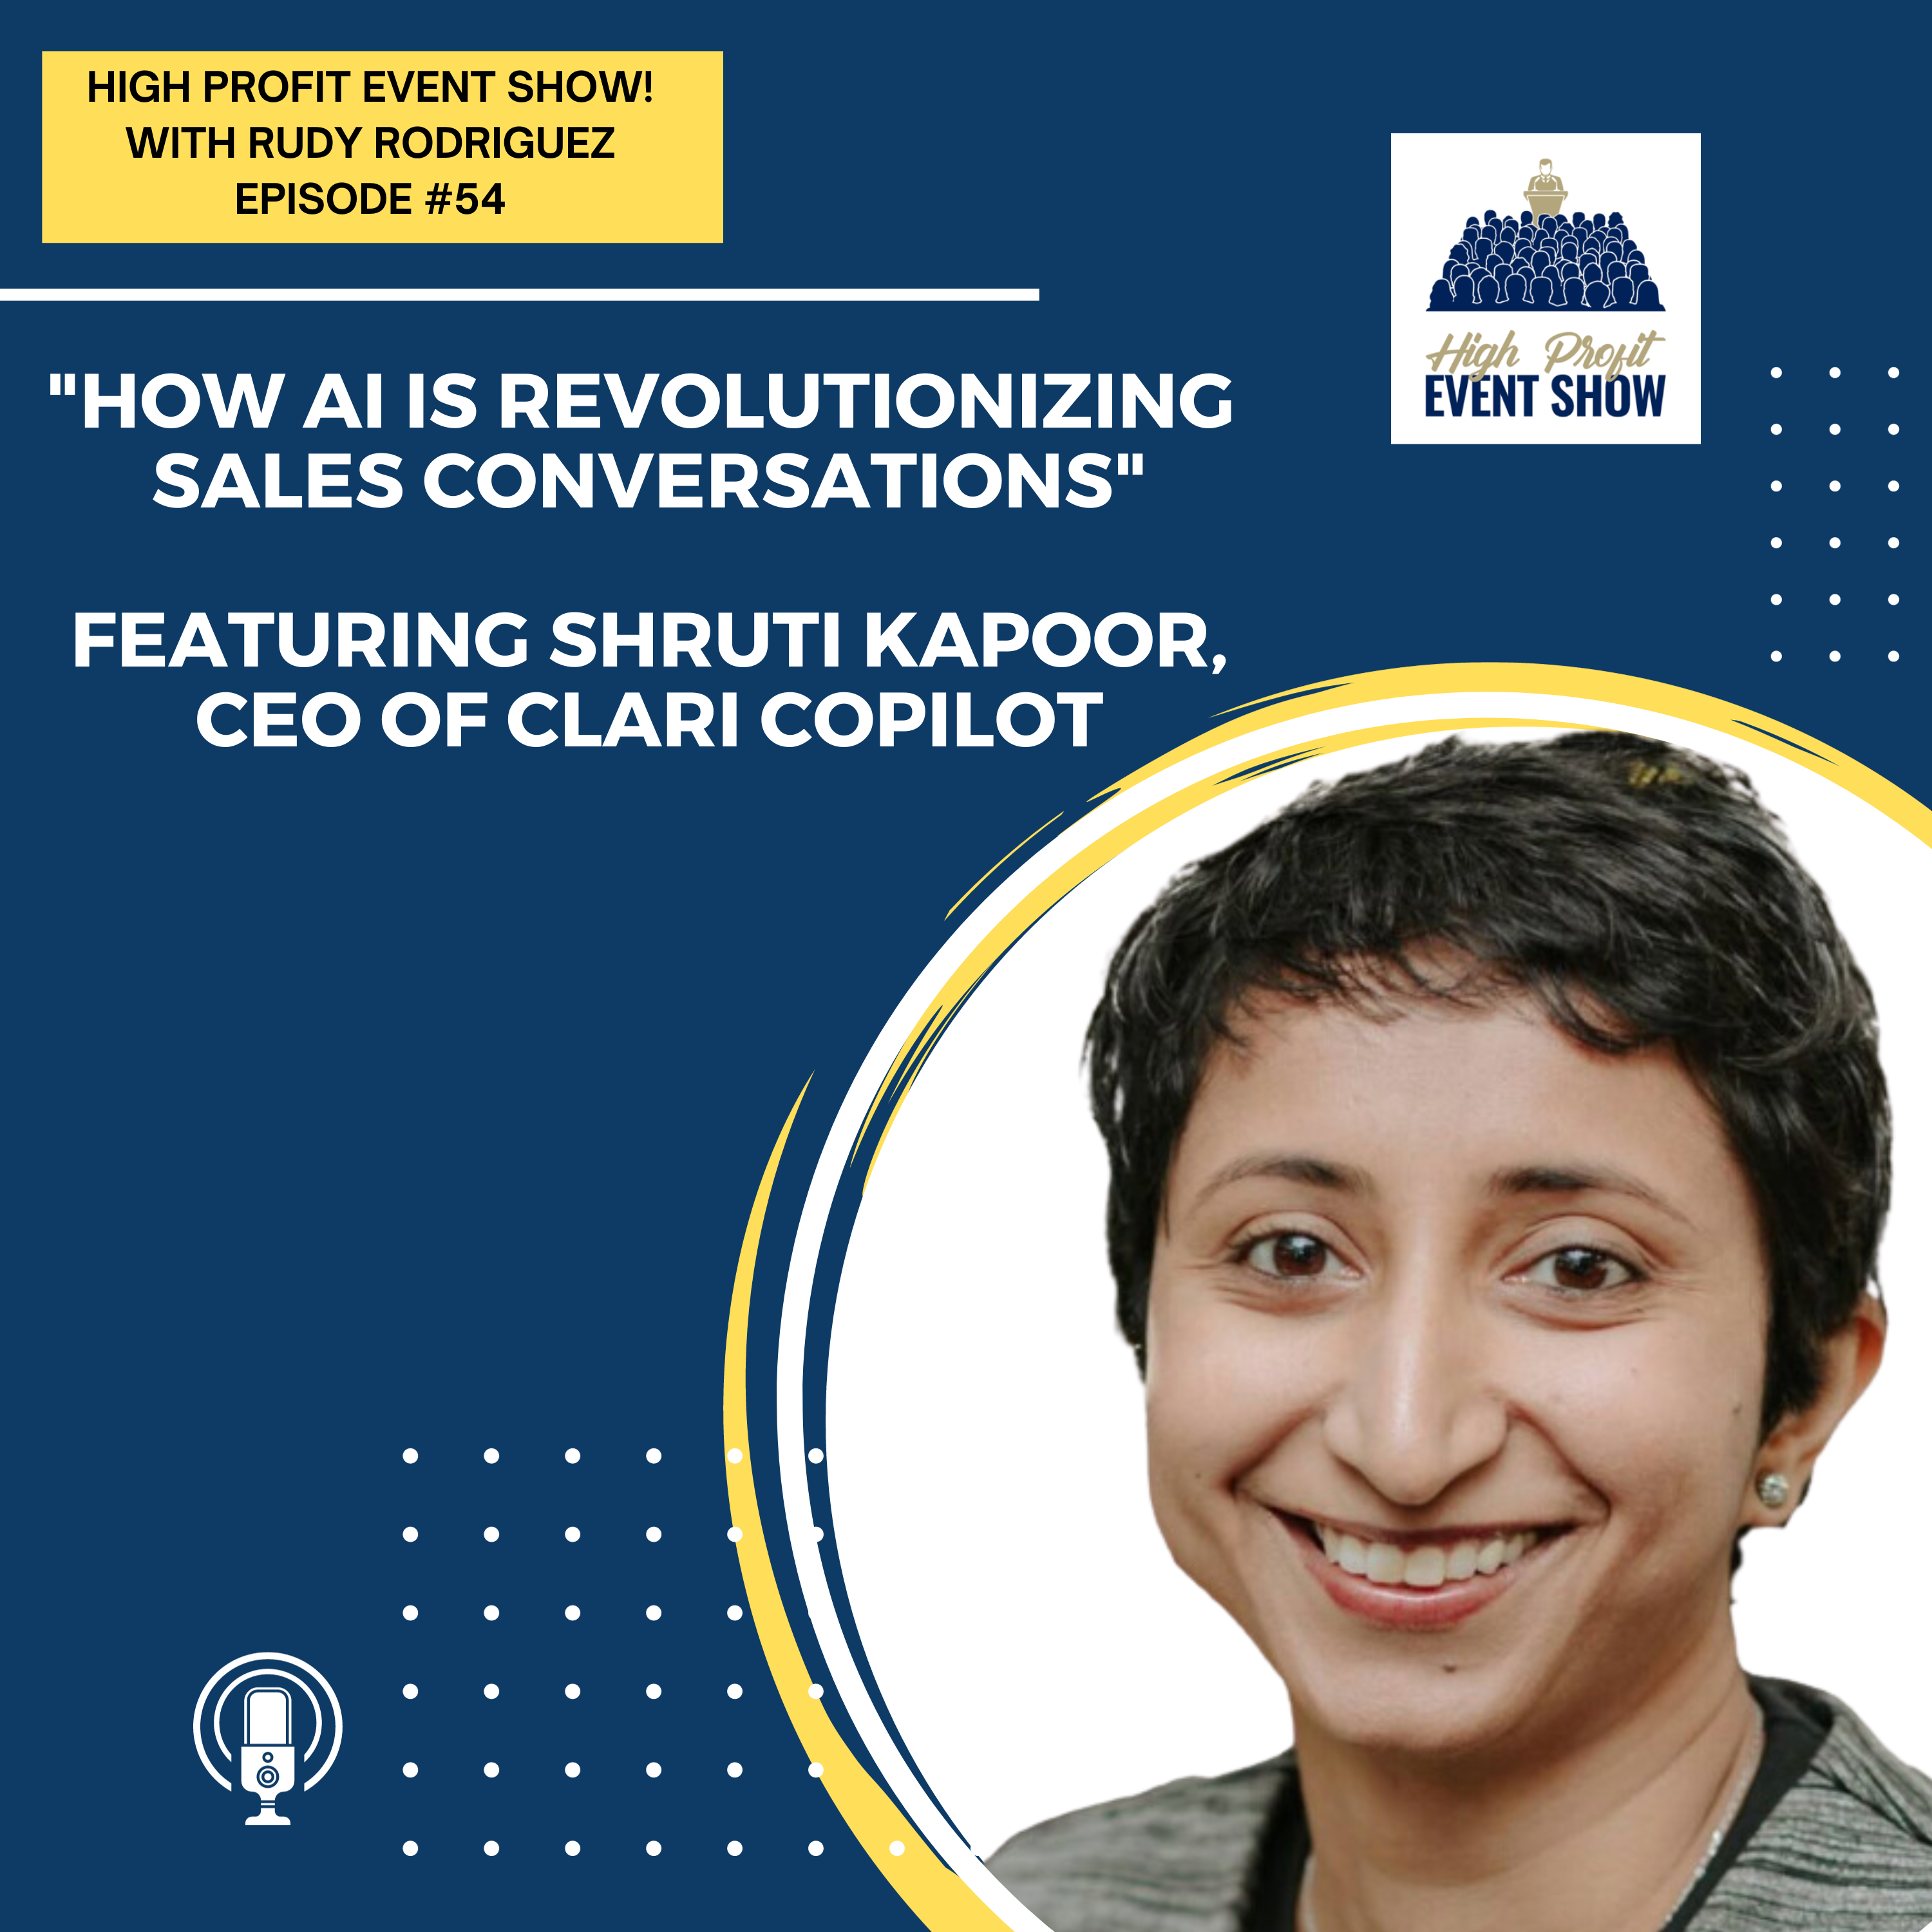 Episode 54: How AI is Revolutionizing Sales Conversations with Shruti Kapoor!